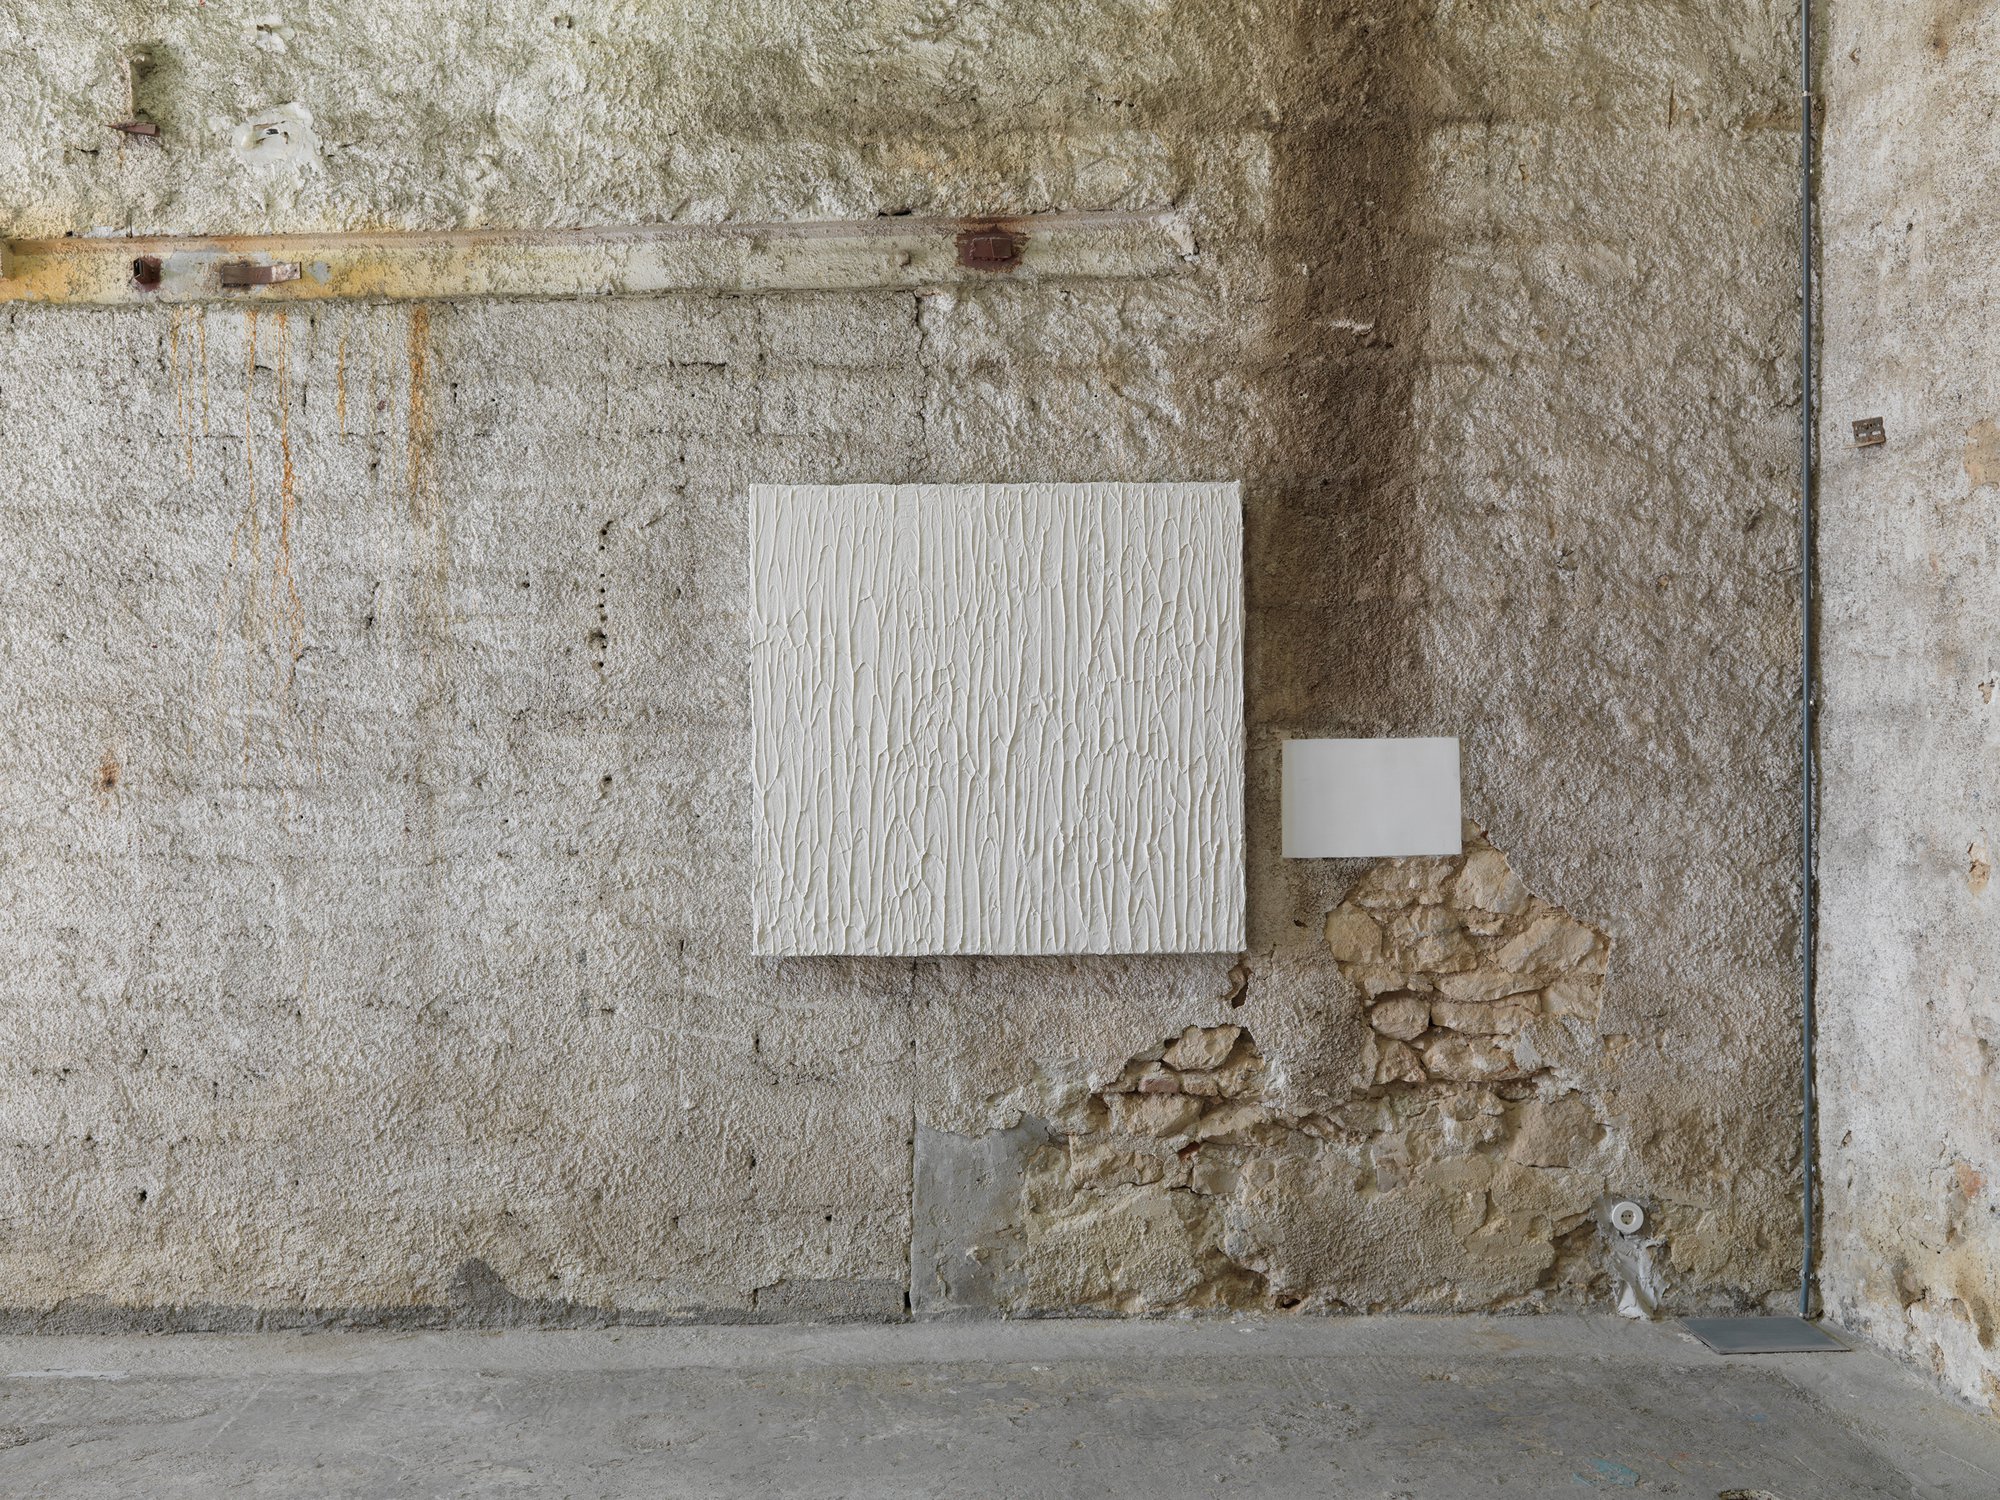 Christodoulos Panayiotou, Untitled (Sagre), sagre acrylic finish, wall paint, foam board, mortar, wooden frame, 127.5 x 121.5 x 6 cm (50 1/4 x 47 7/8 x 2 3/8 in), 2021